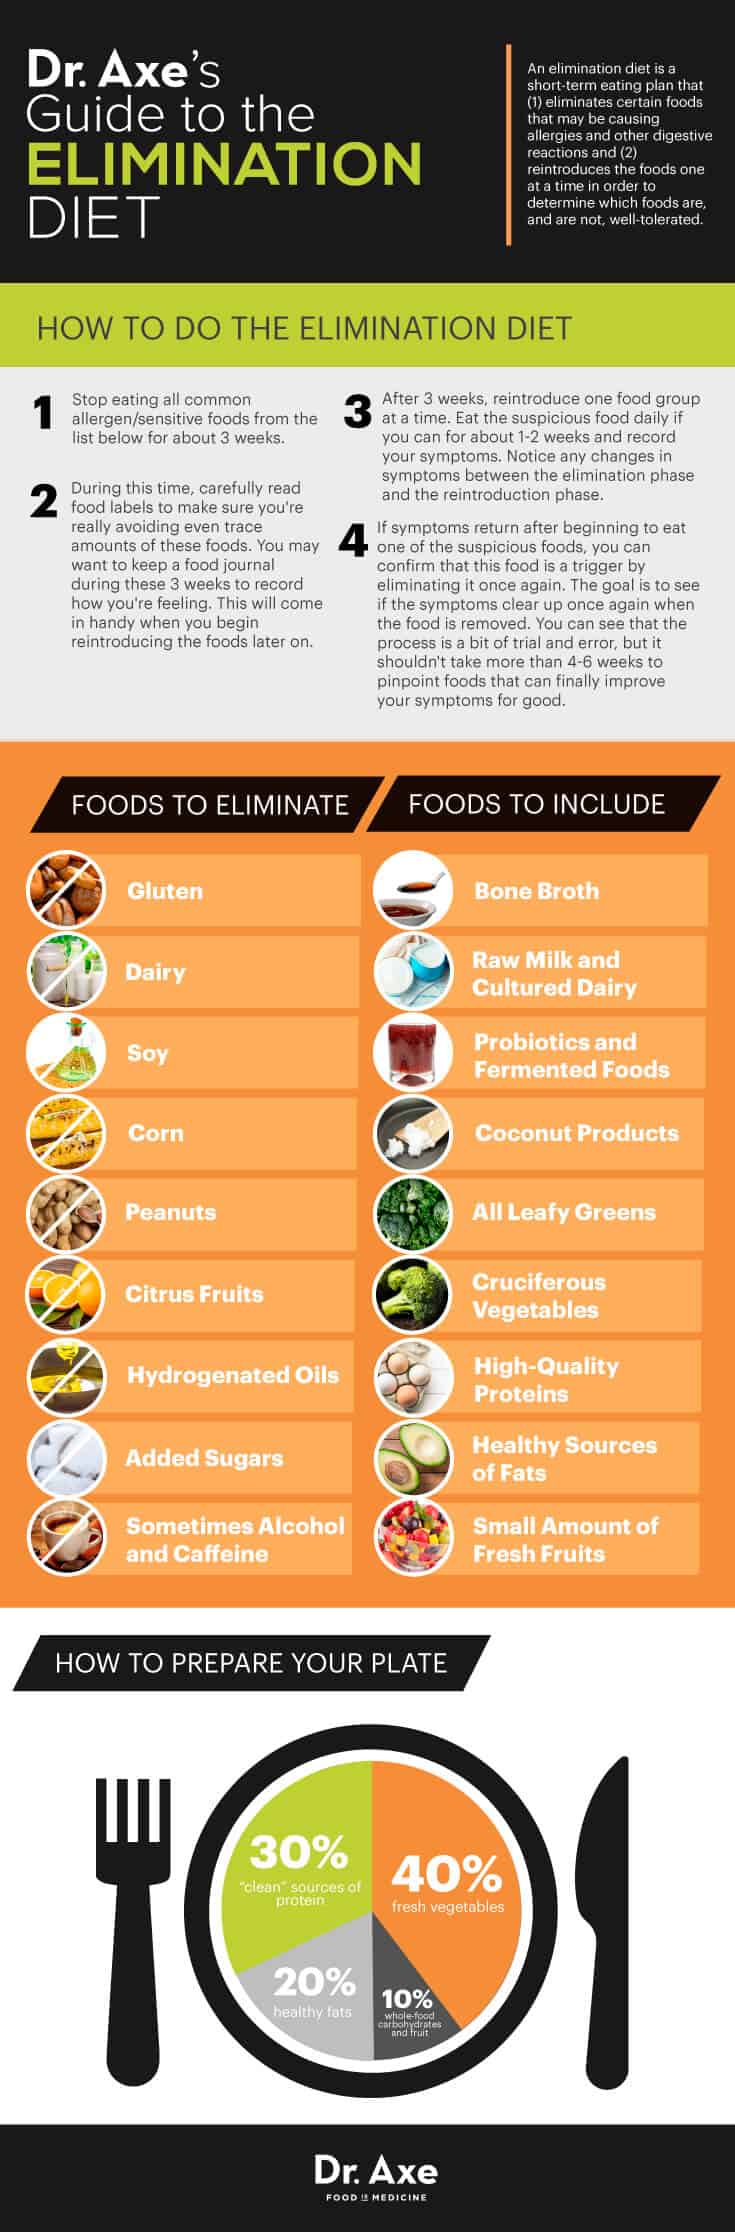 Elimination Diet: Benefits, Foods to Remove + Plan - Dr. Axe